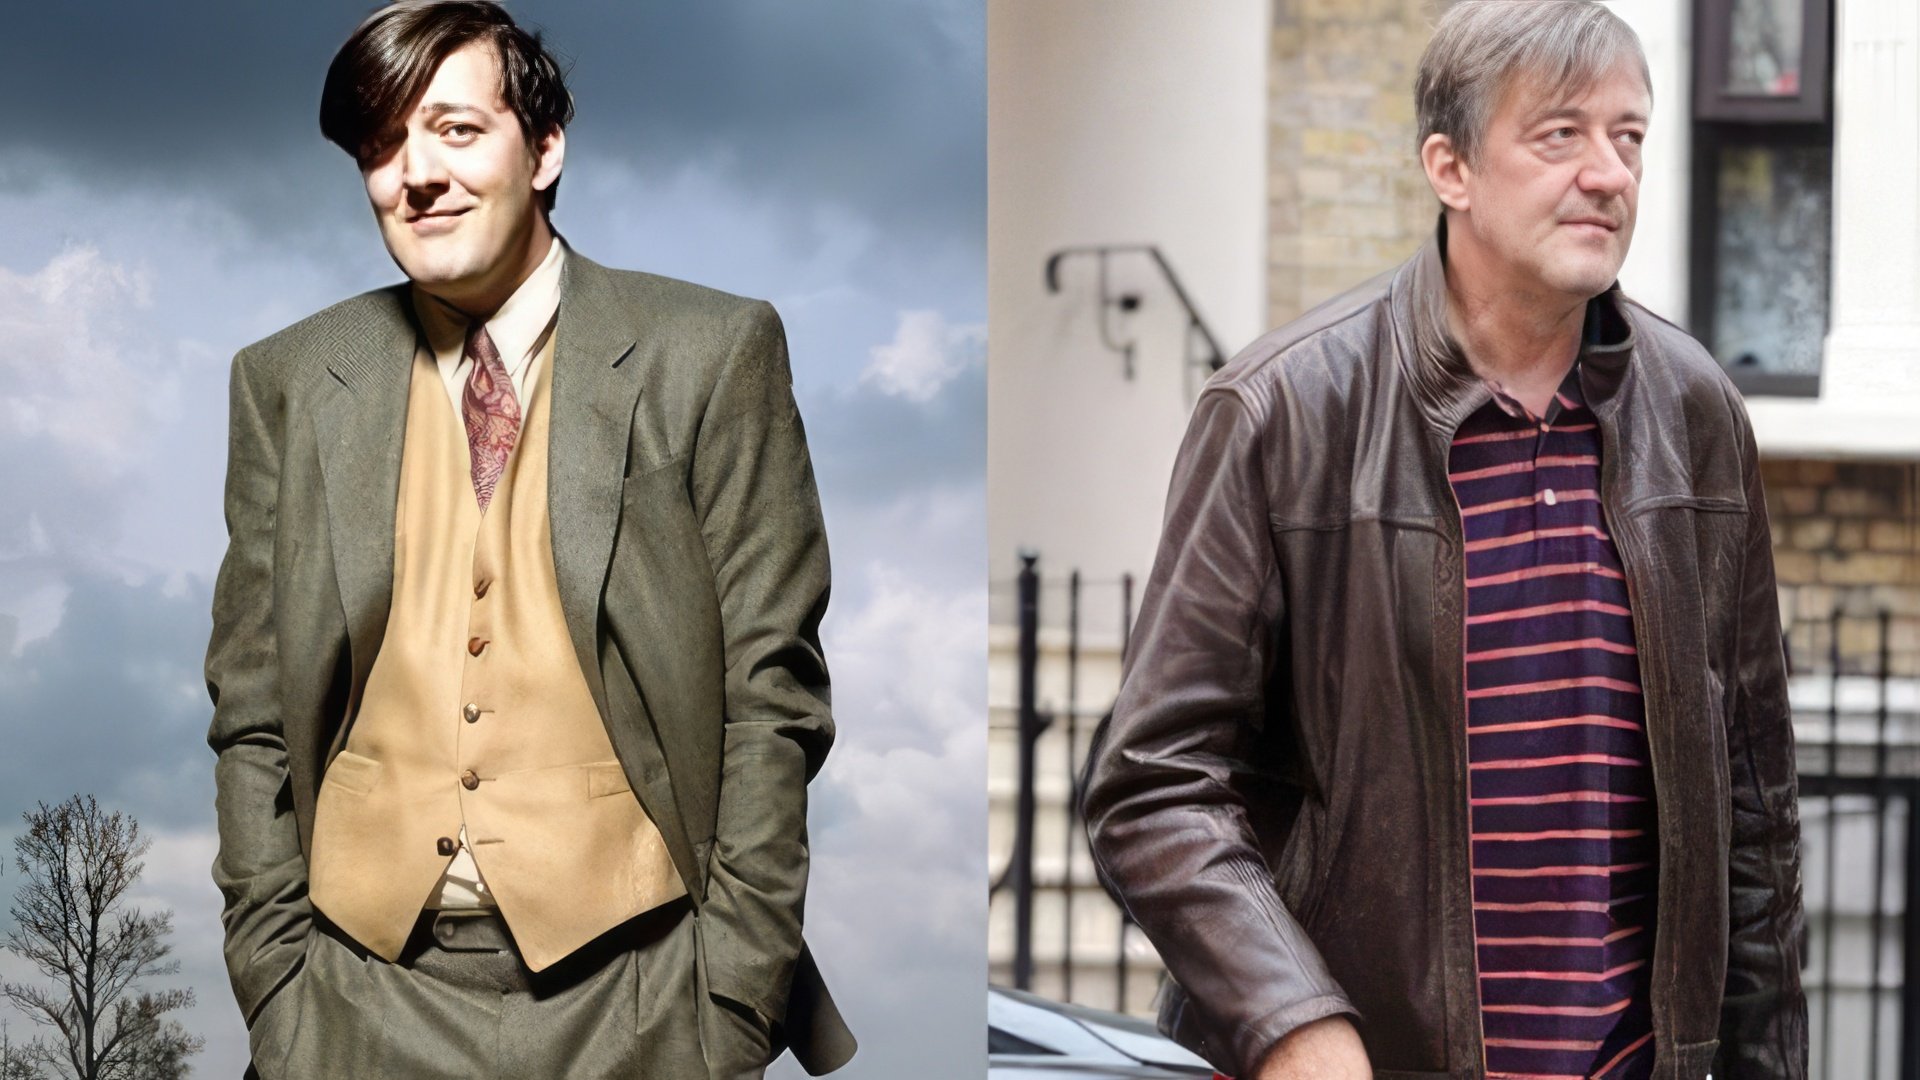 At the age of 40, Stephen Fry decided to lose weight, give up smoking and do sports